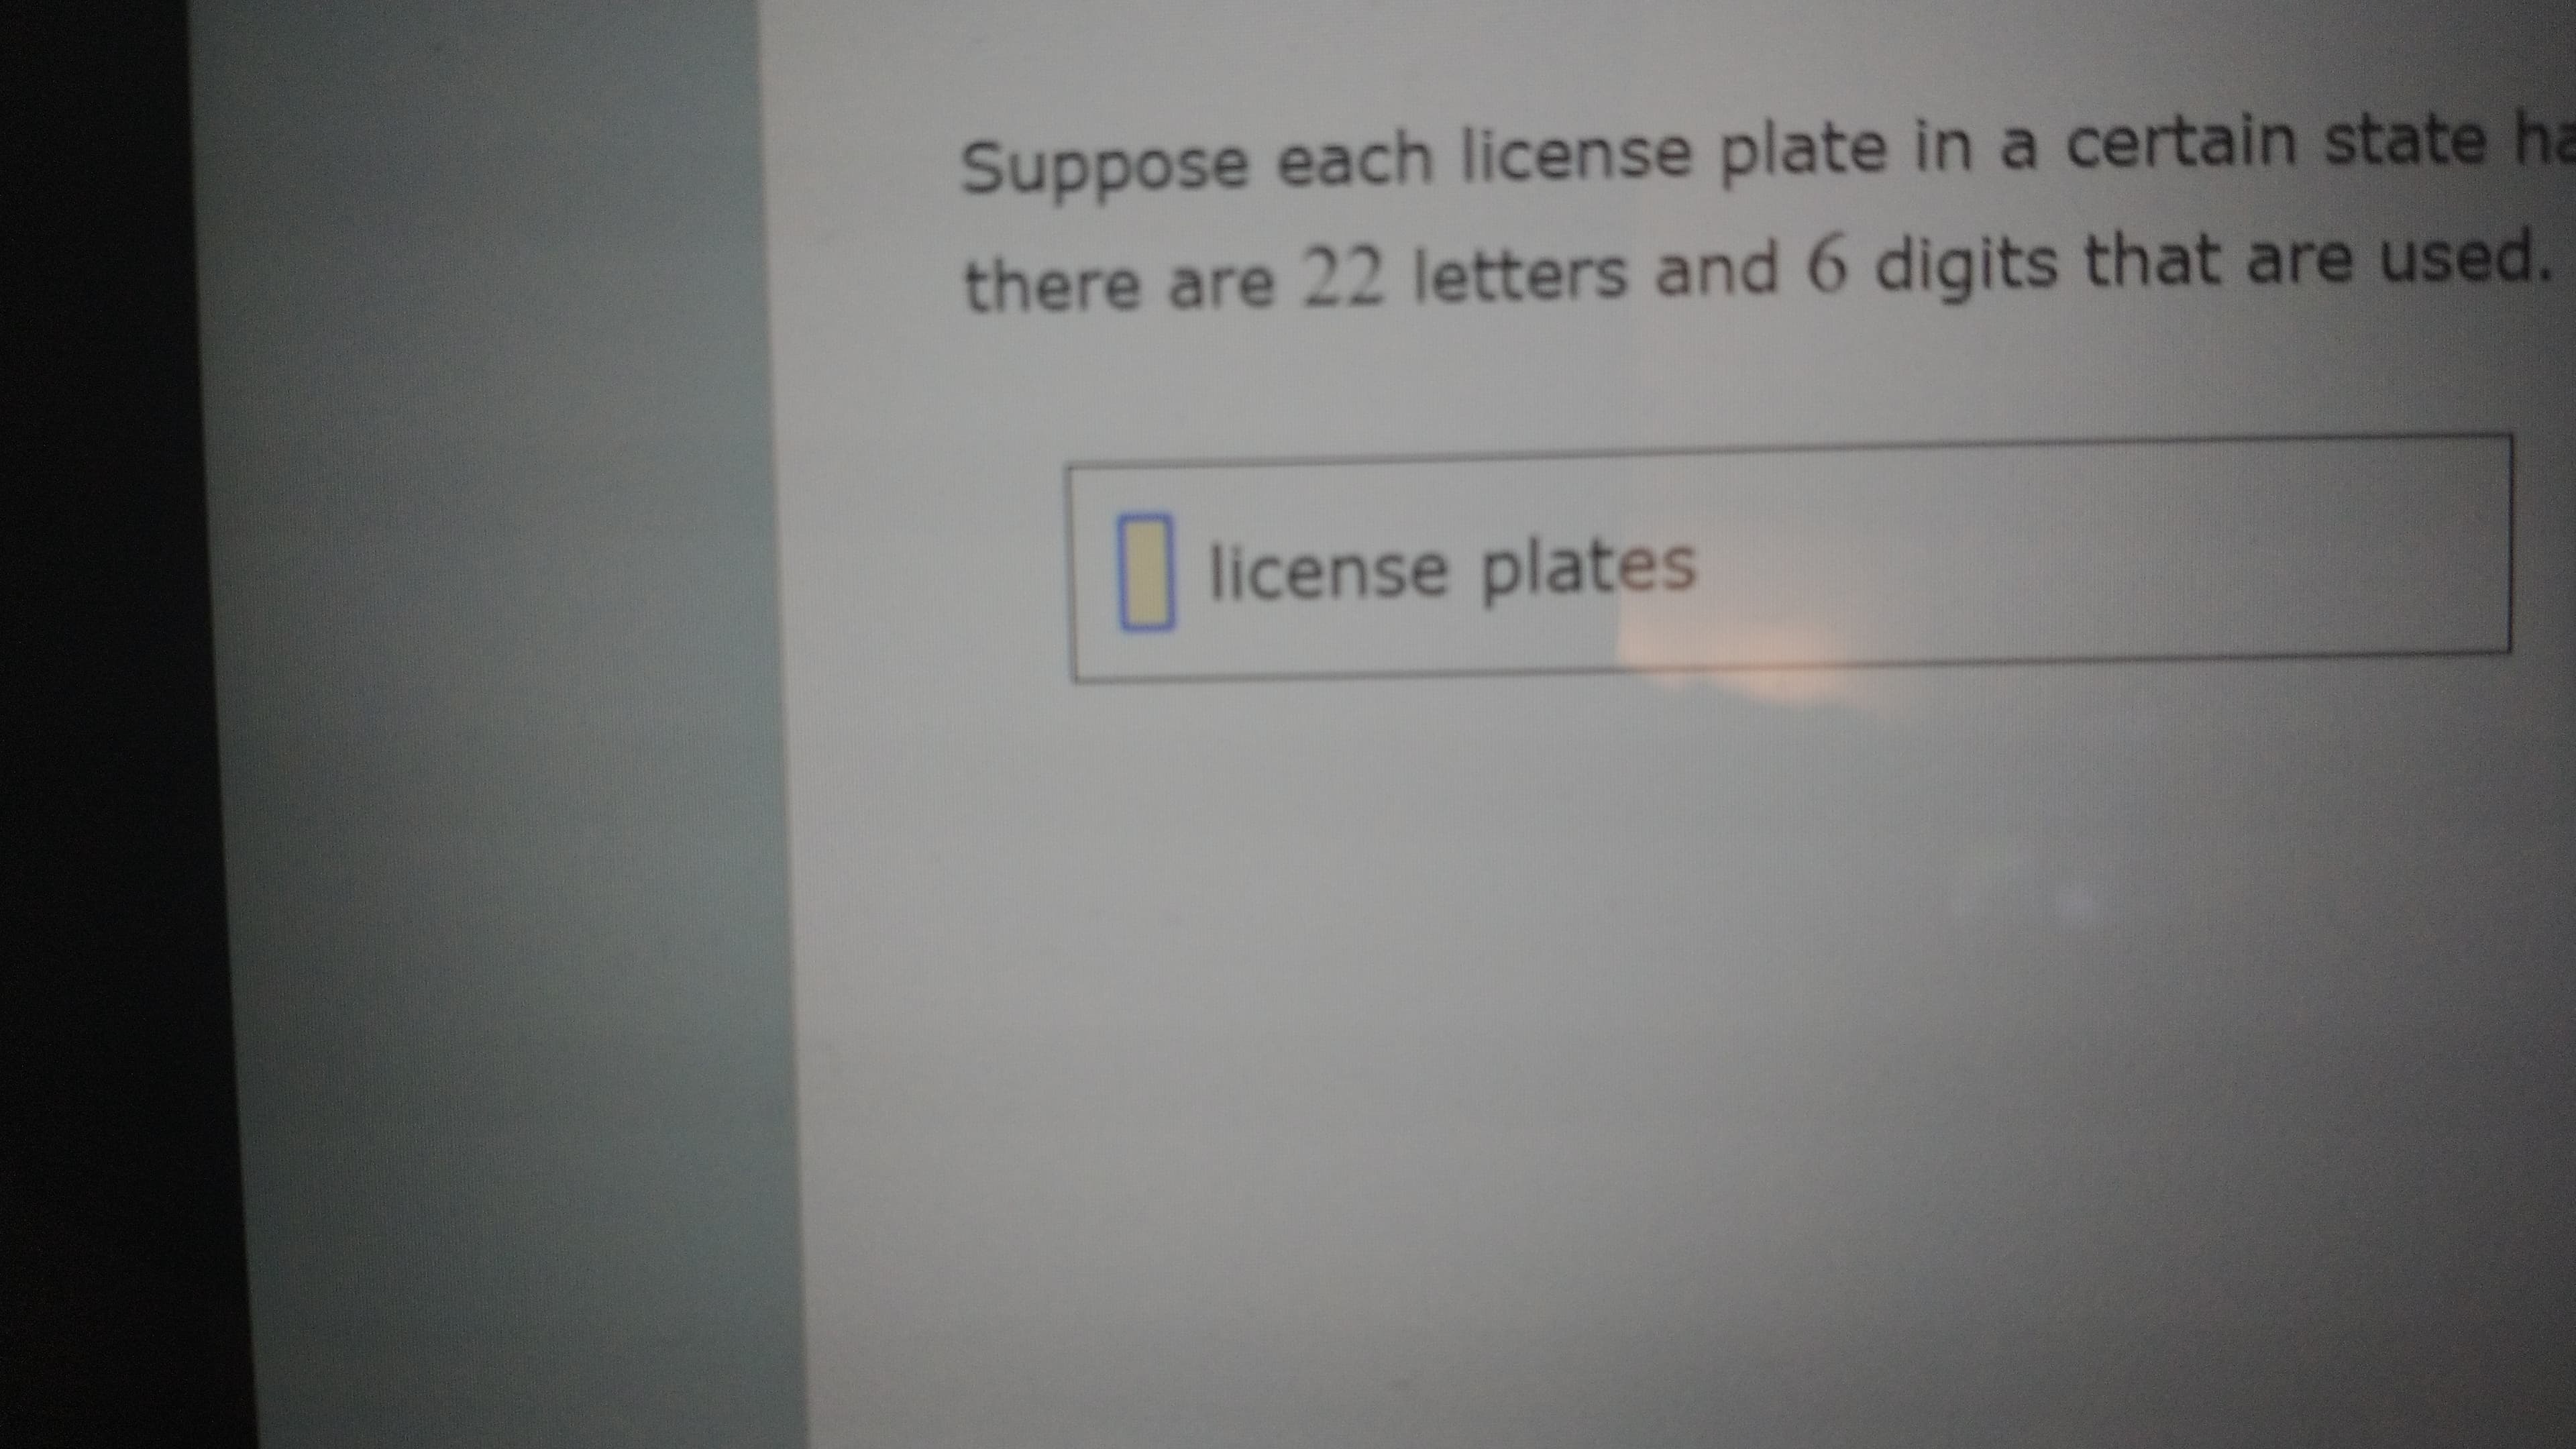 Suppose each license plate in a certain state ha
there are 22 letters and 6 digits that are used.
| license plates
